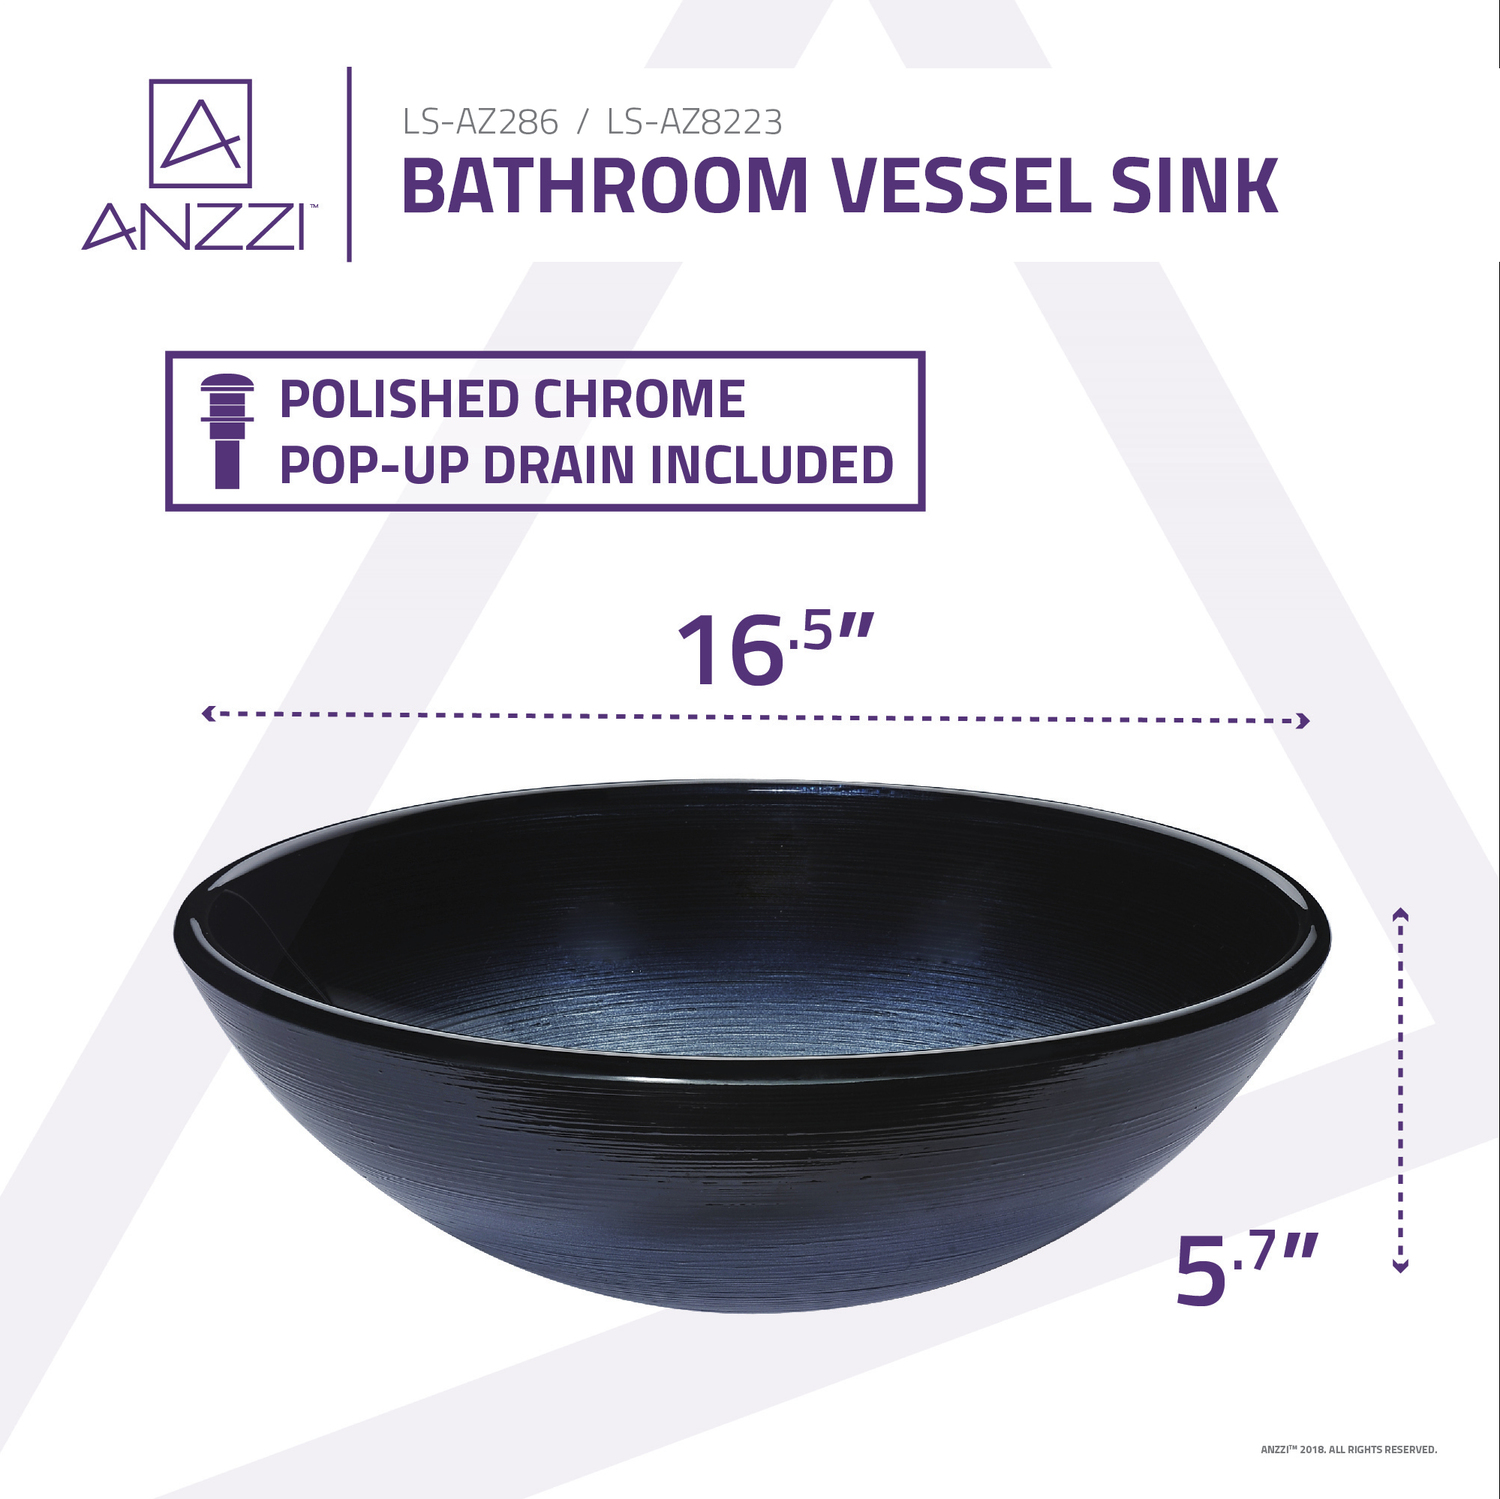 vanity without countertop Anzzi BATHROOM - Sinks - Vessel - Tempered Glass Brown